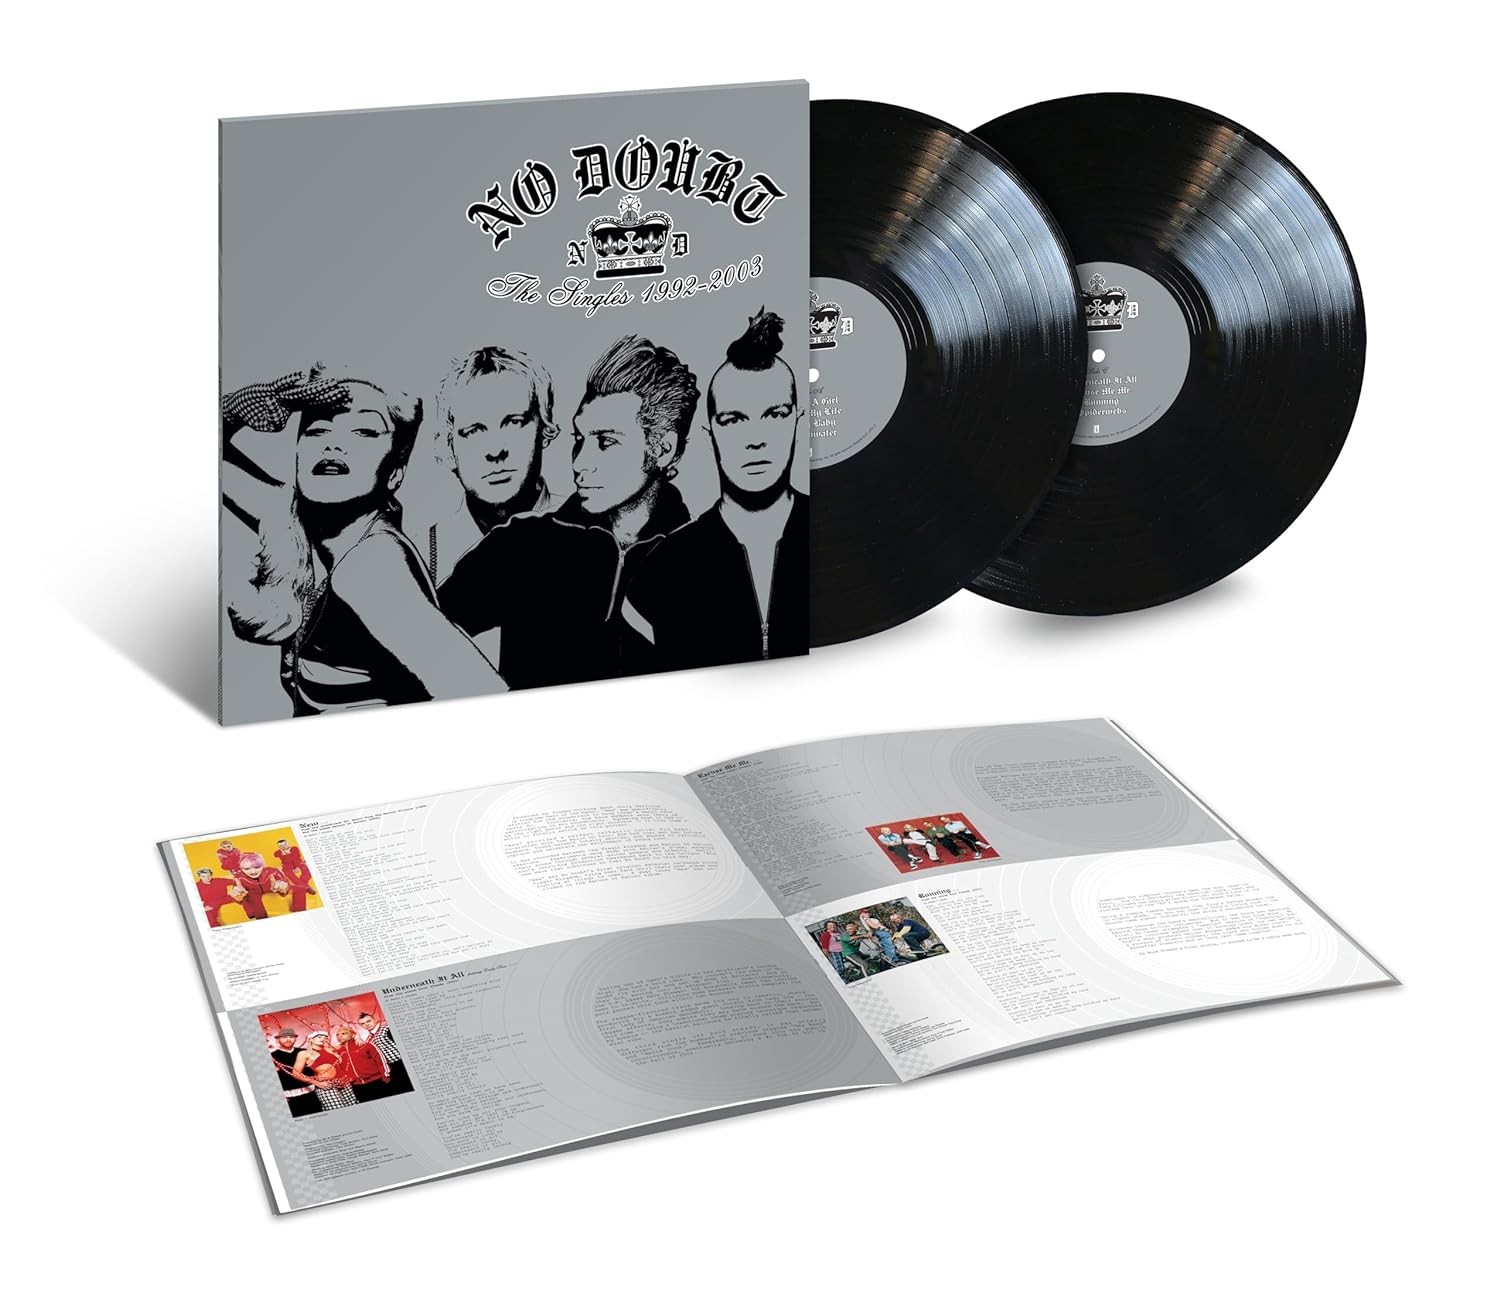 No Doubt - The Singles 1992-2003